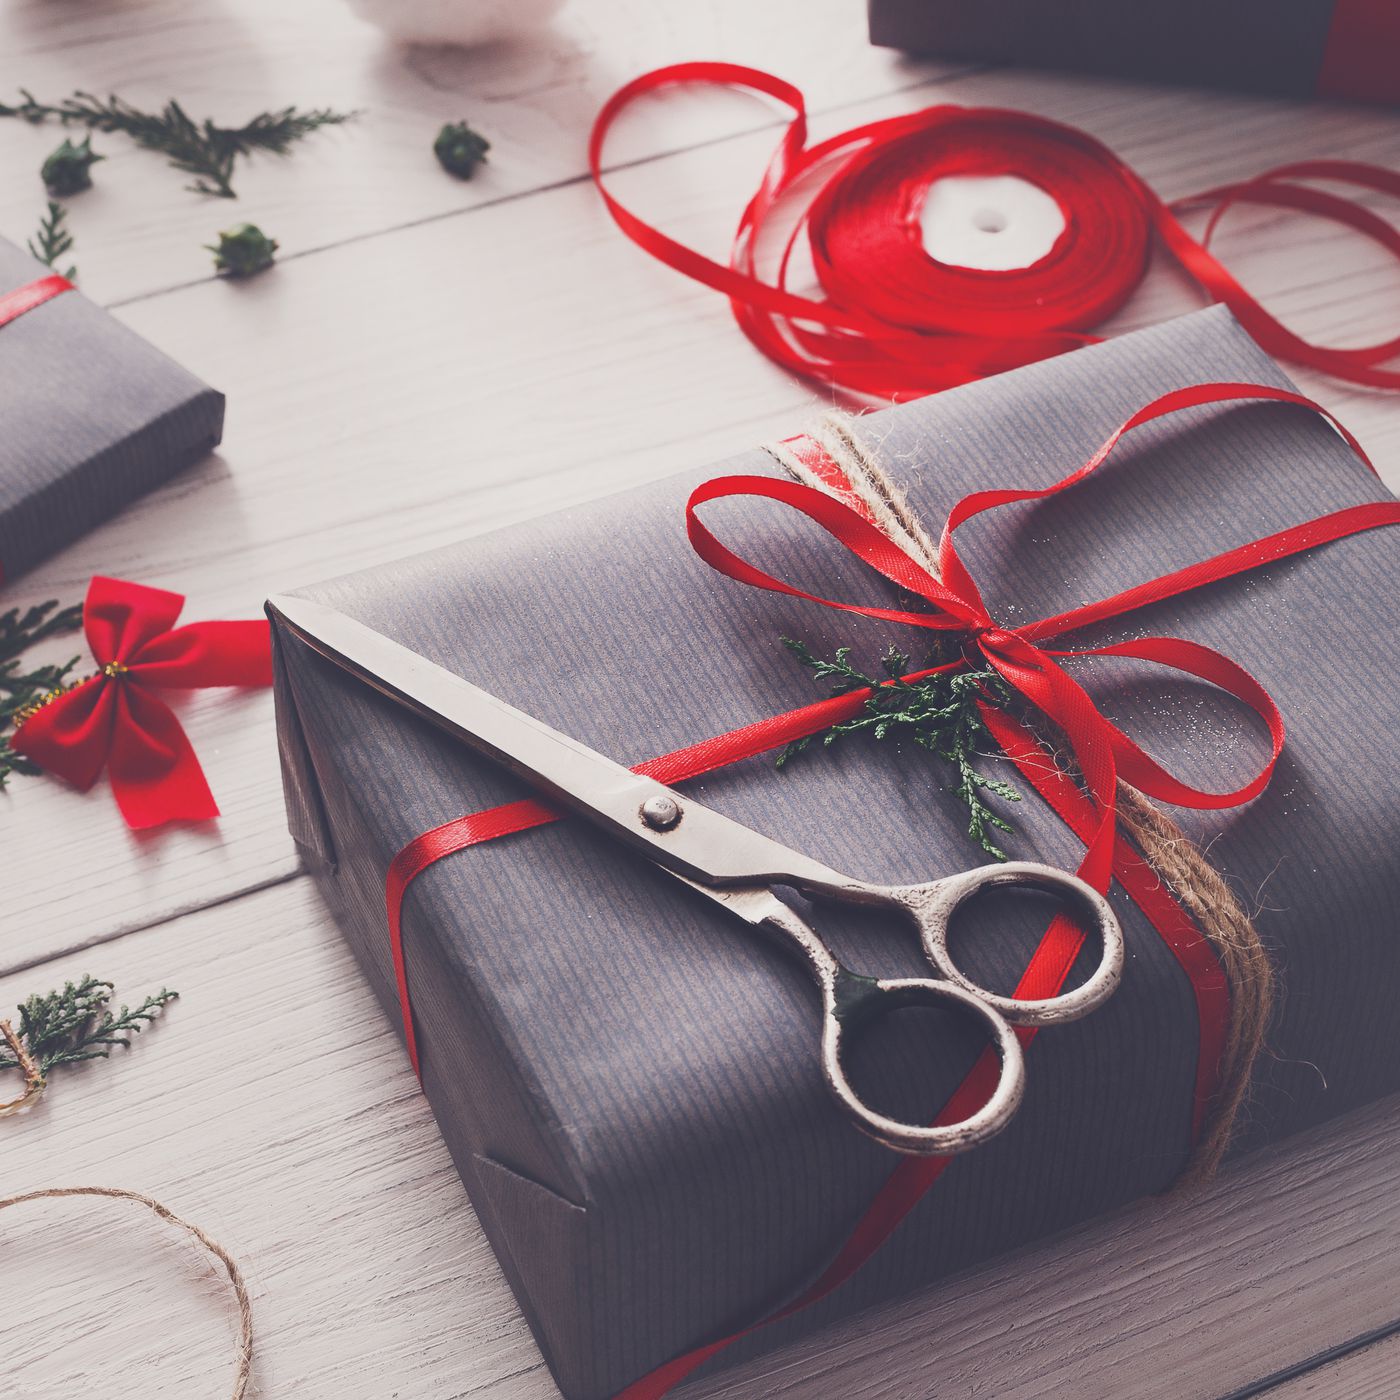 How to wrap a present: 6 tips to use this holiday season - Curbed